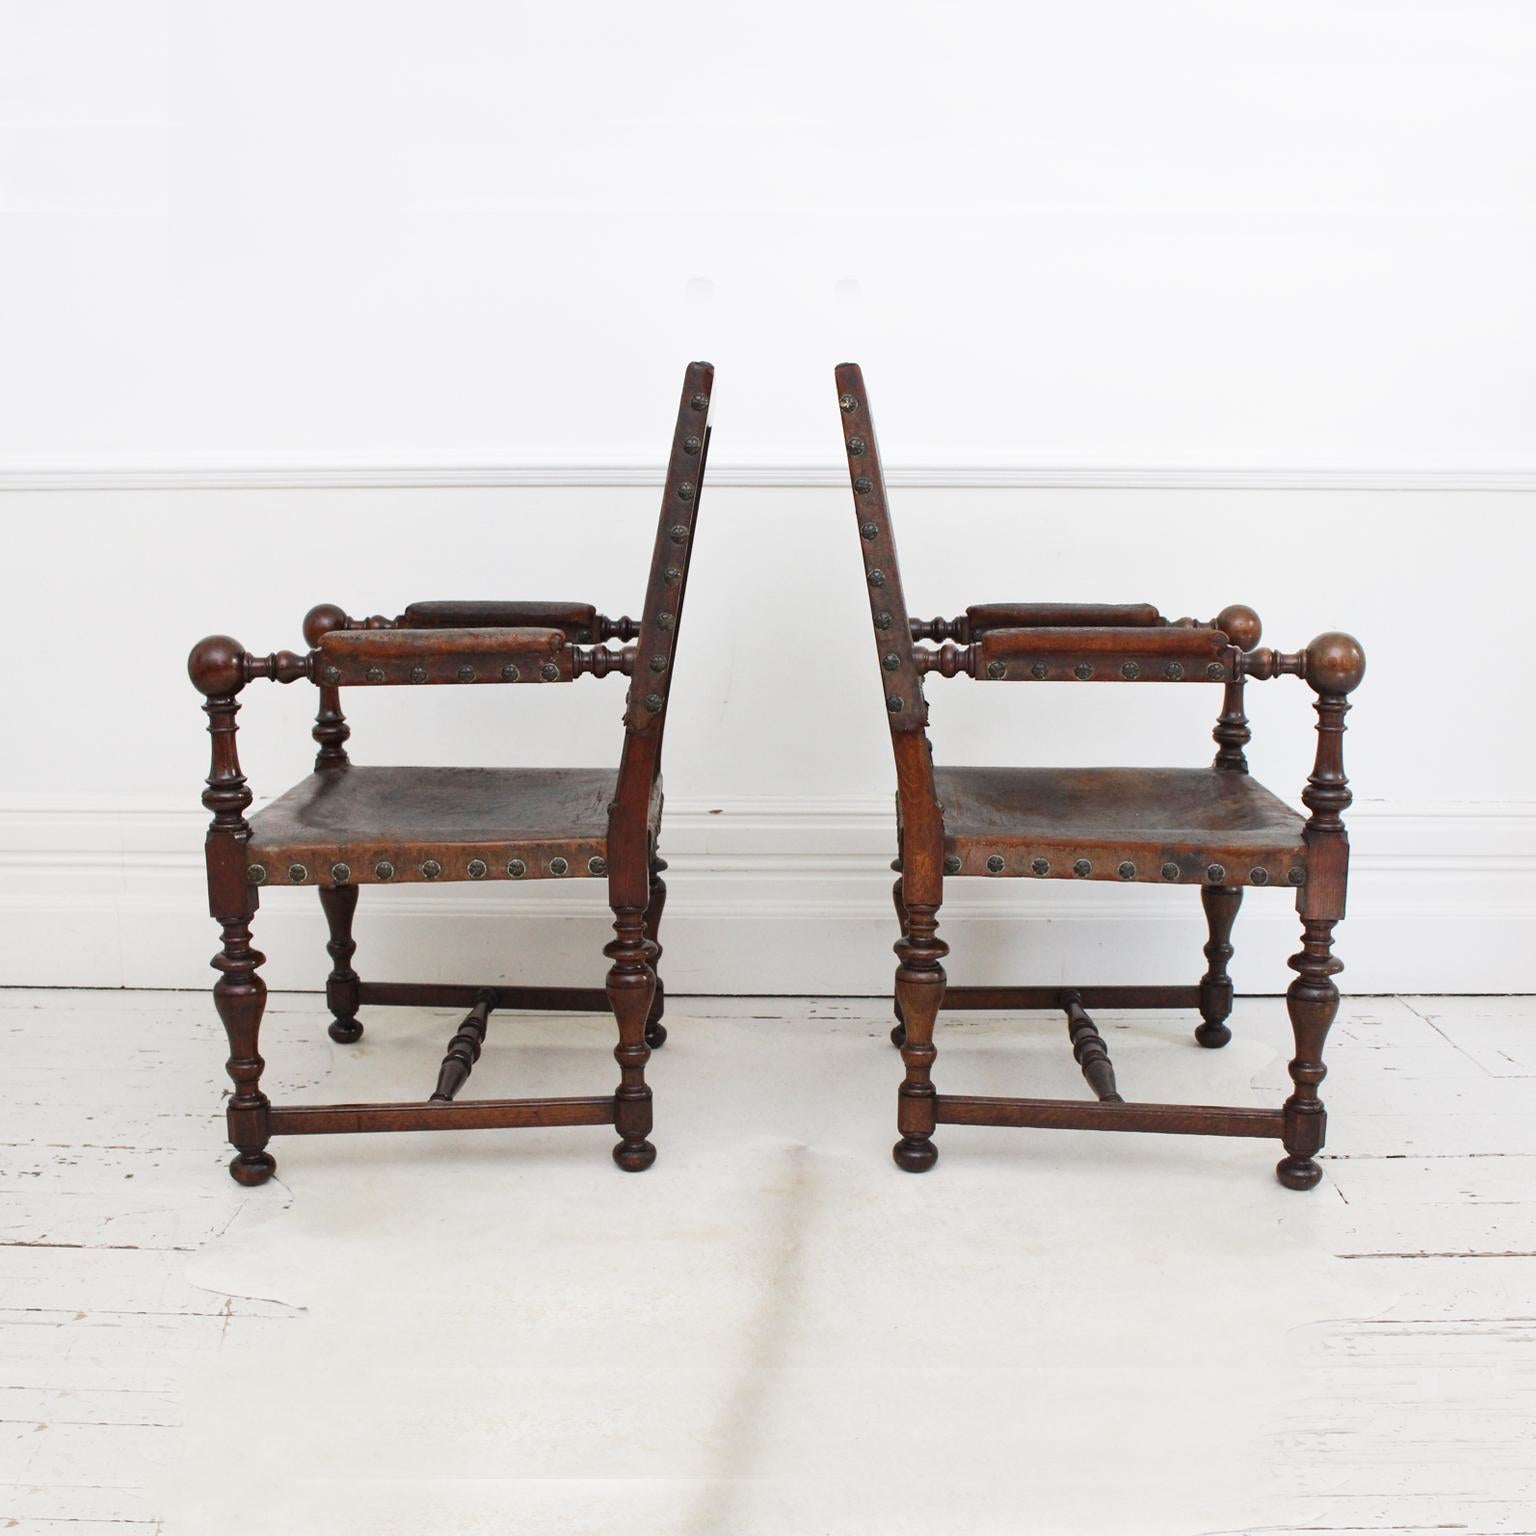 This magnificent, large pair of oak armchairs retain their original, beautifully worn and embossed brown leather. They are profusely turned throughout. The leather is scalloped and studded, the oak has a good color. These would look great at the